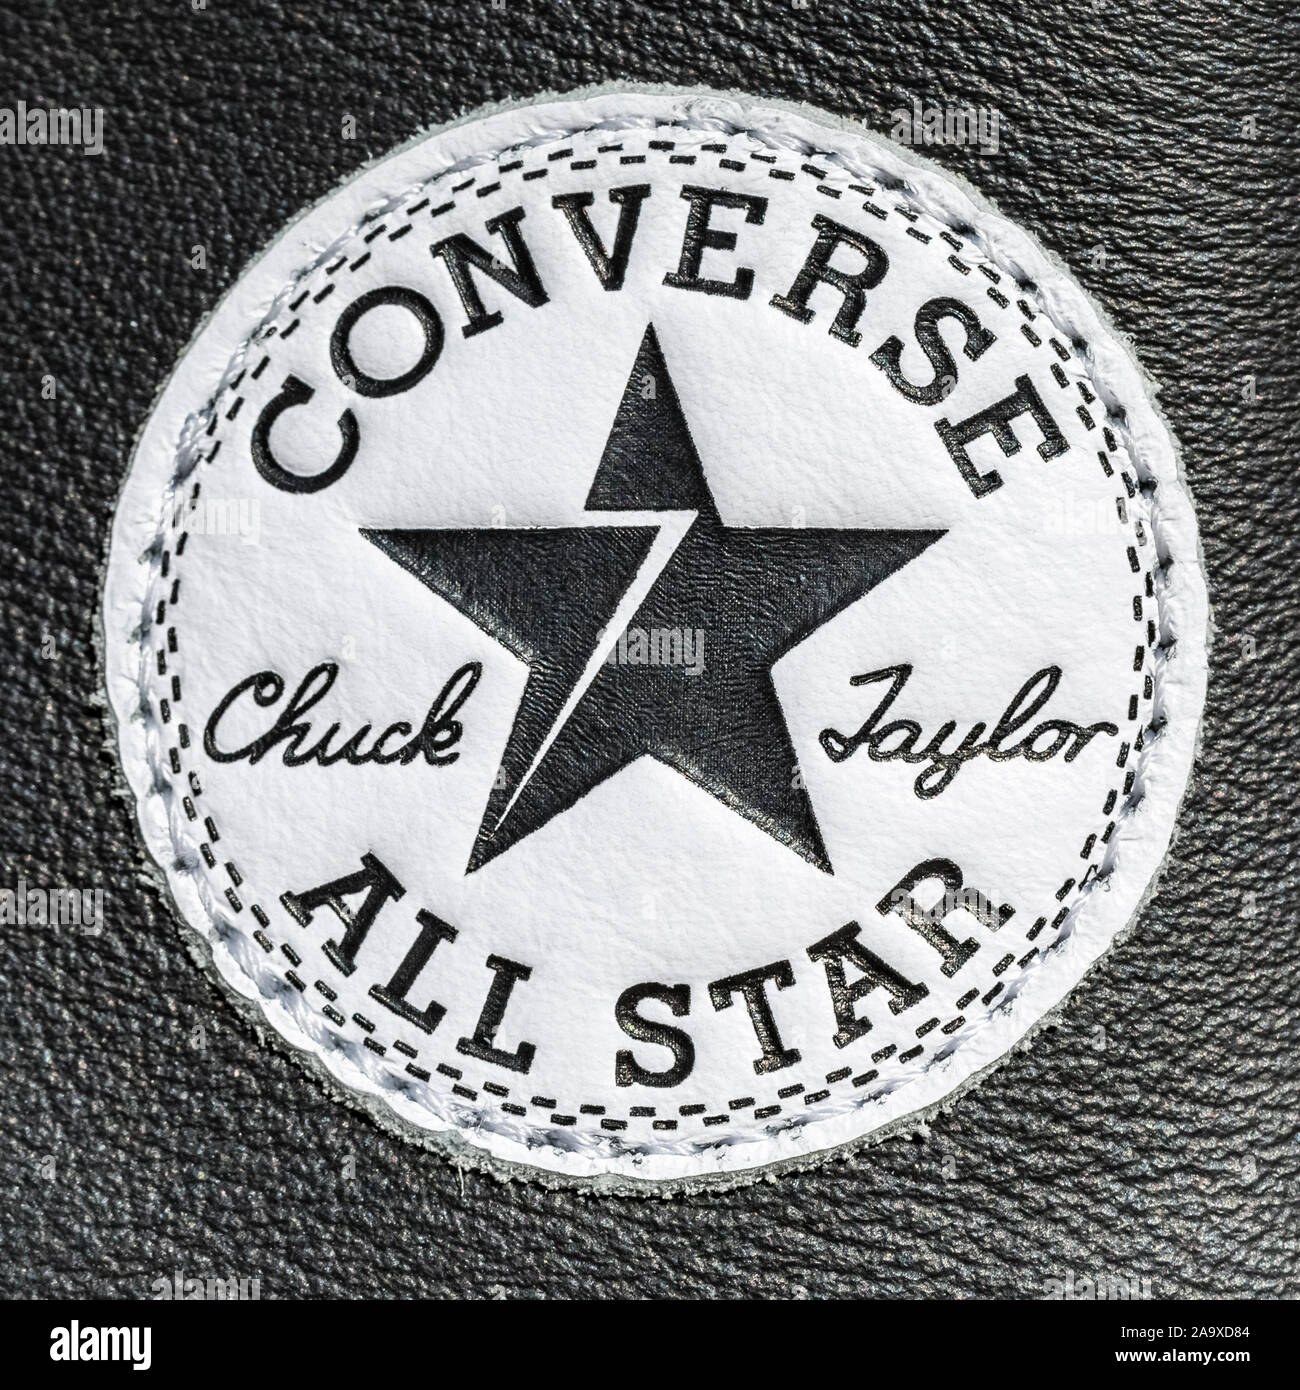 Chartres, France - Spetember 2, 2019: Close-up of the logo of All Star  Converse sneakers seen on a leather surface Stock Photo - Alamy